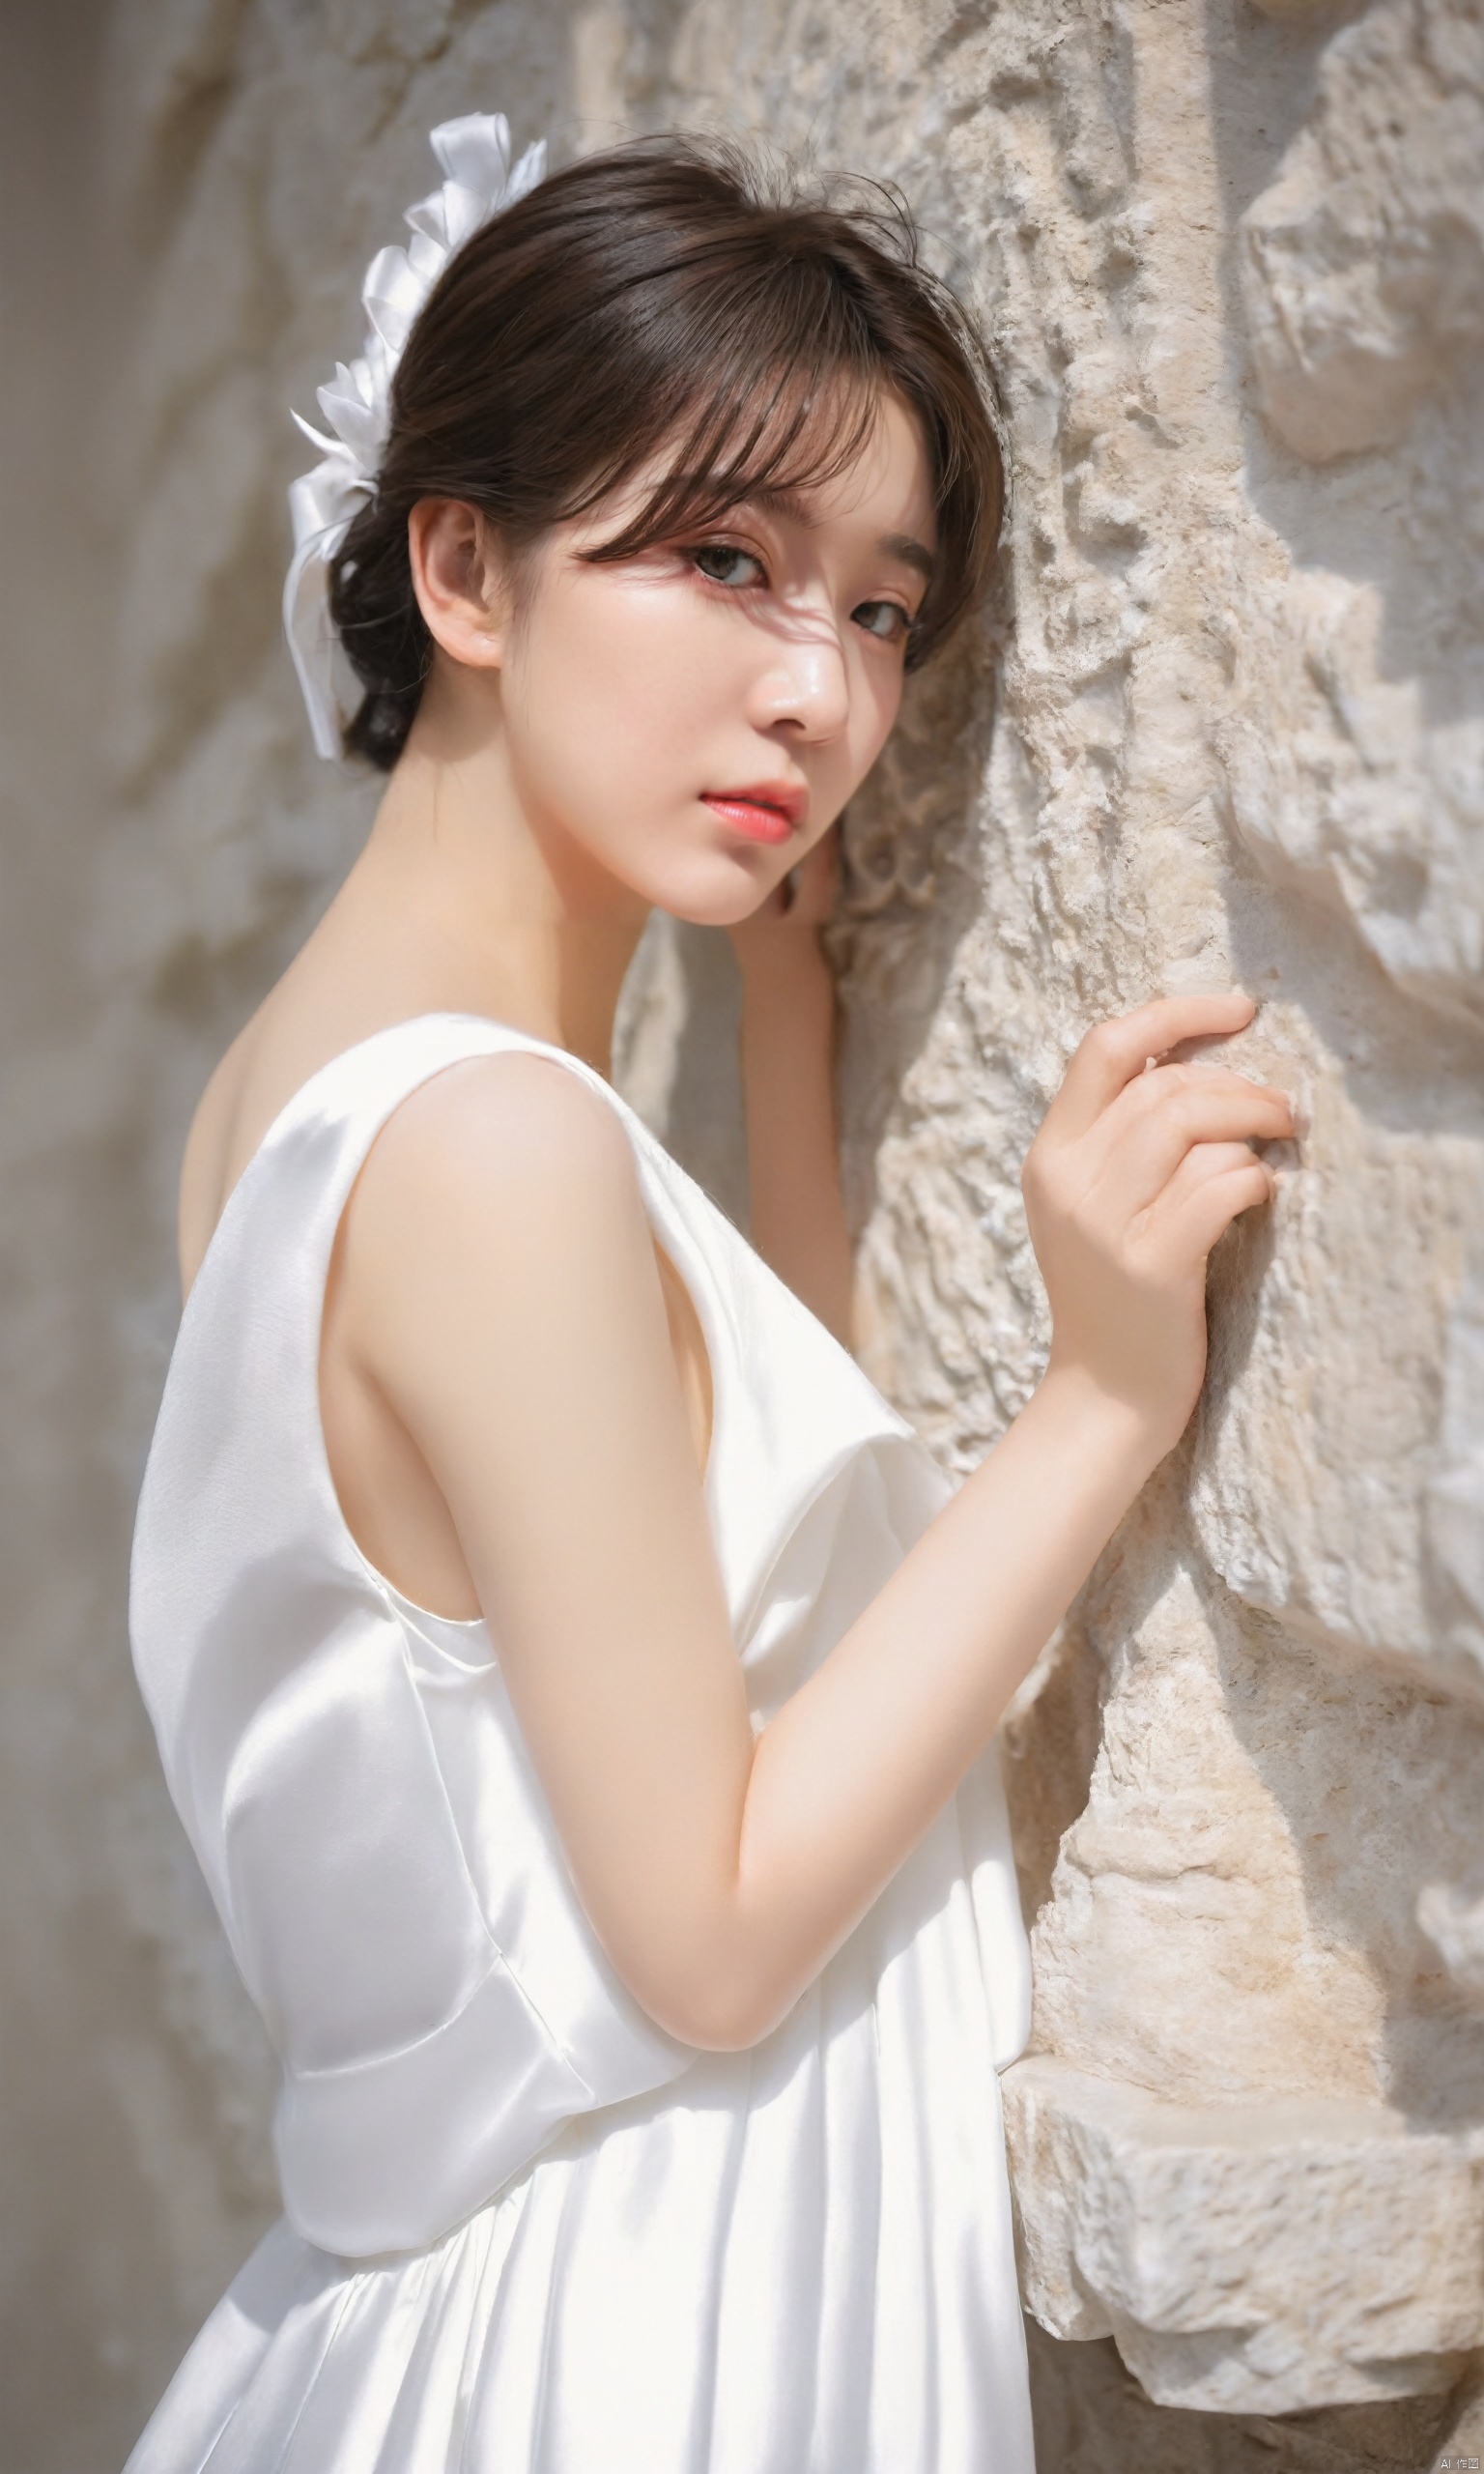  araffe asian woman in white dress leaning against a wall, a marble sculpture by Nagasawa Rosetsu, pixiv, rococo, smooth translucent white skin, realistic young gravure idol, young sensual gravure idol